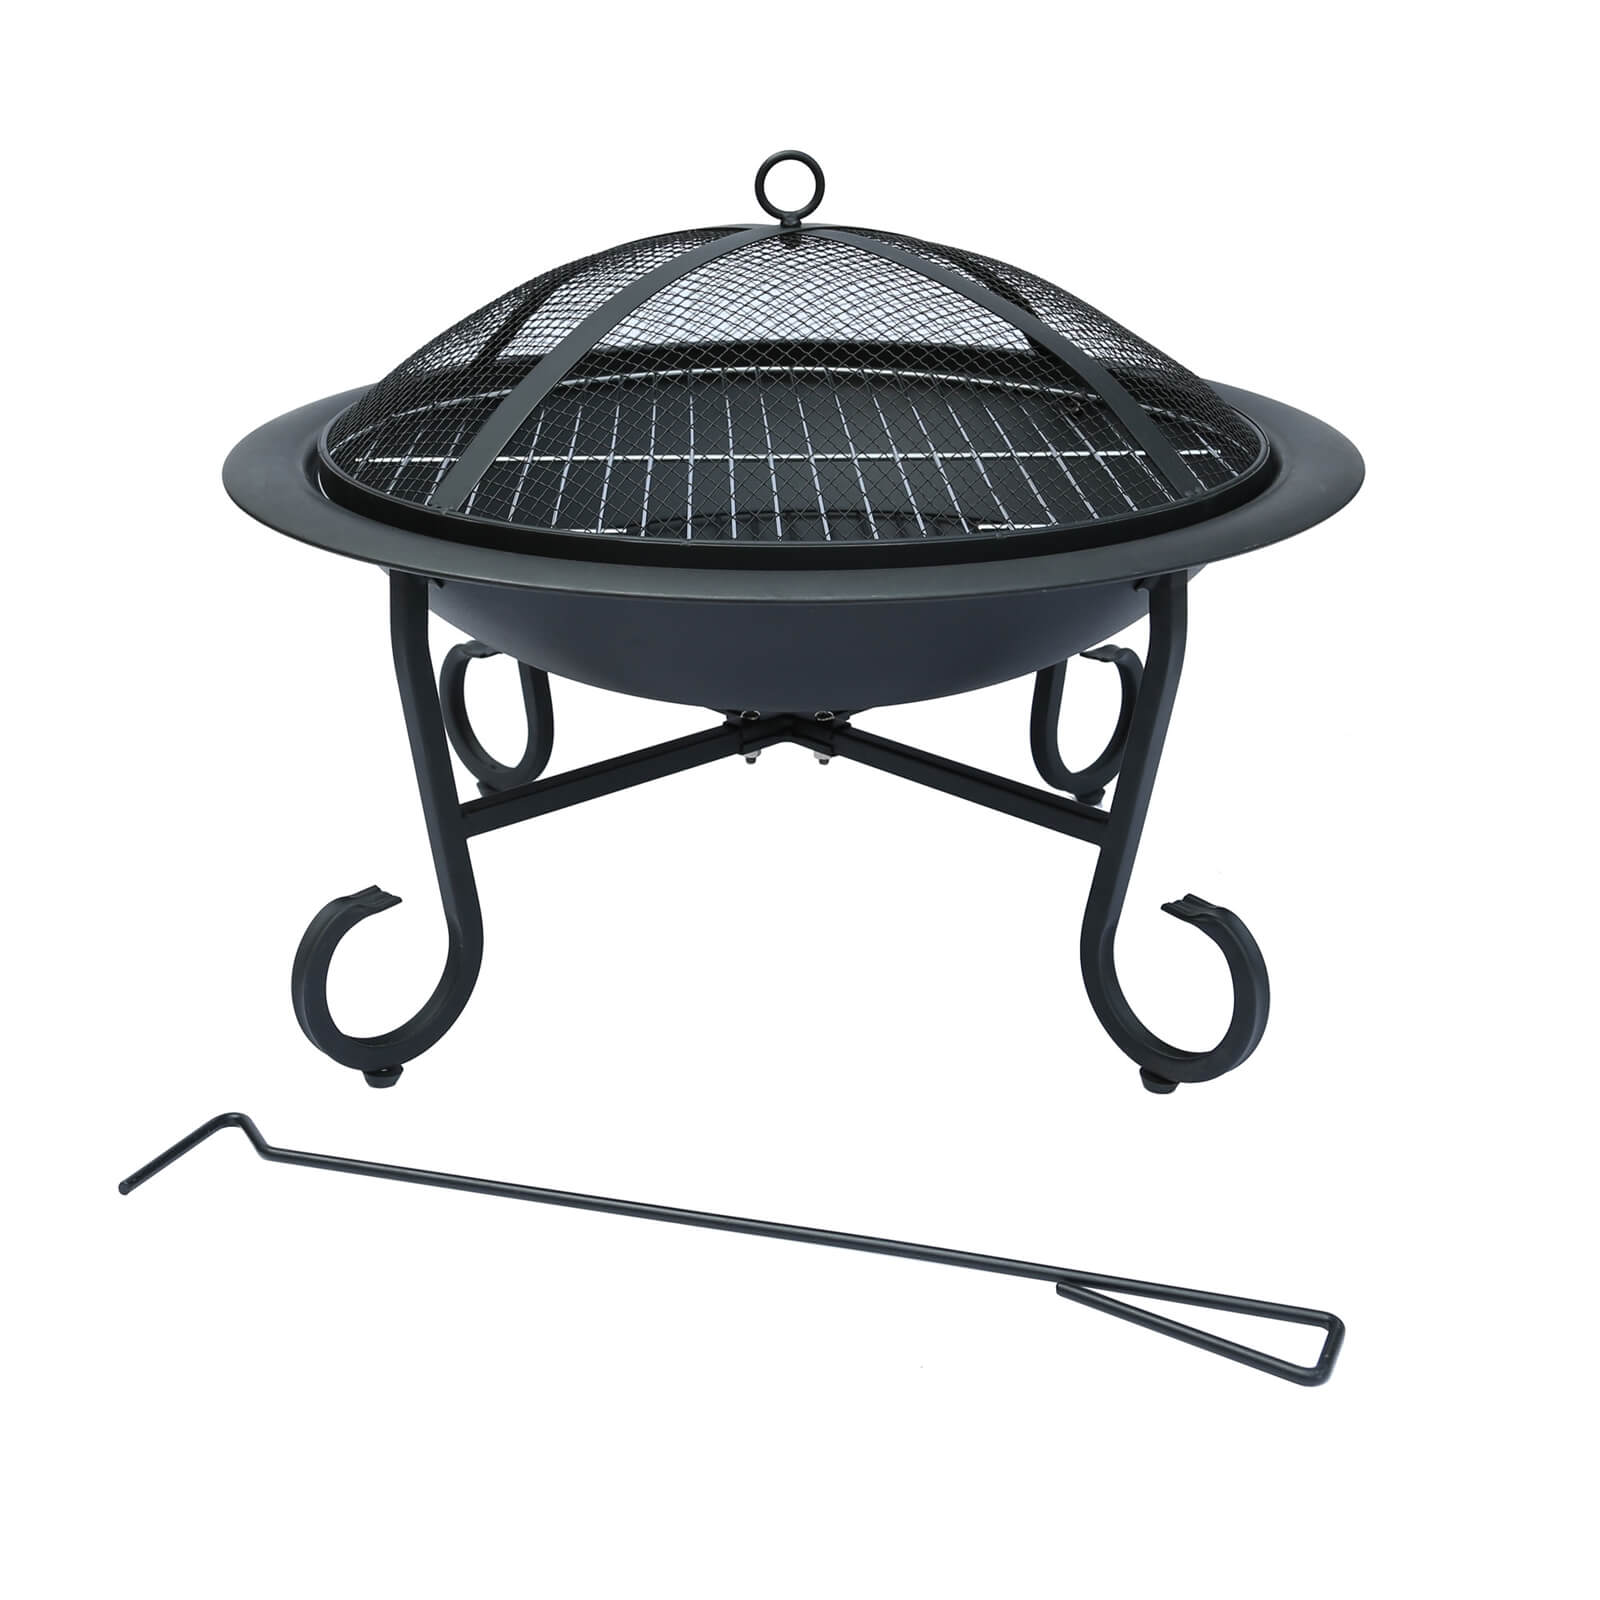 Charles Bentley Round Open Bowl Fire Pit - Black